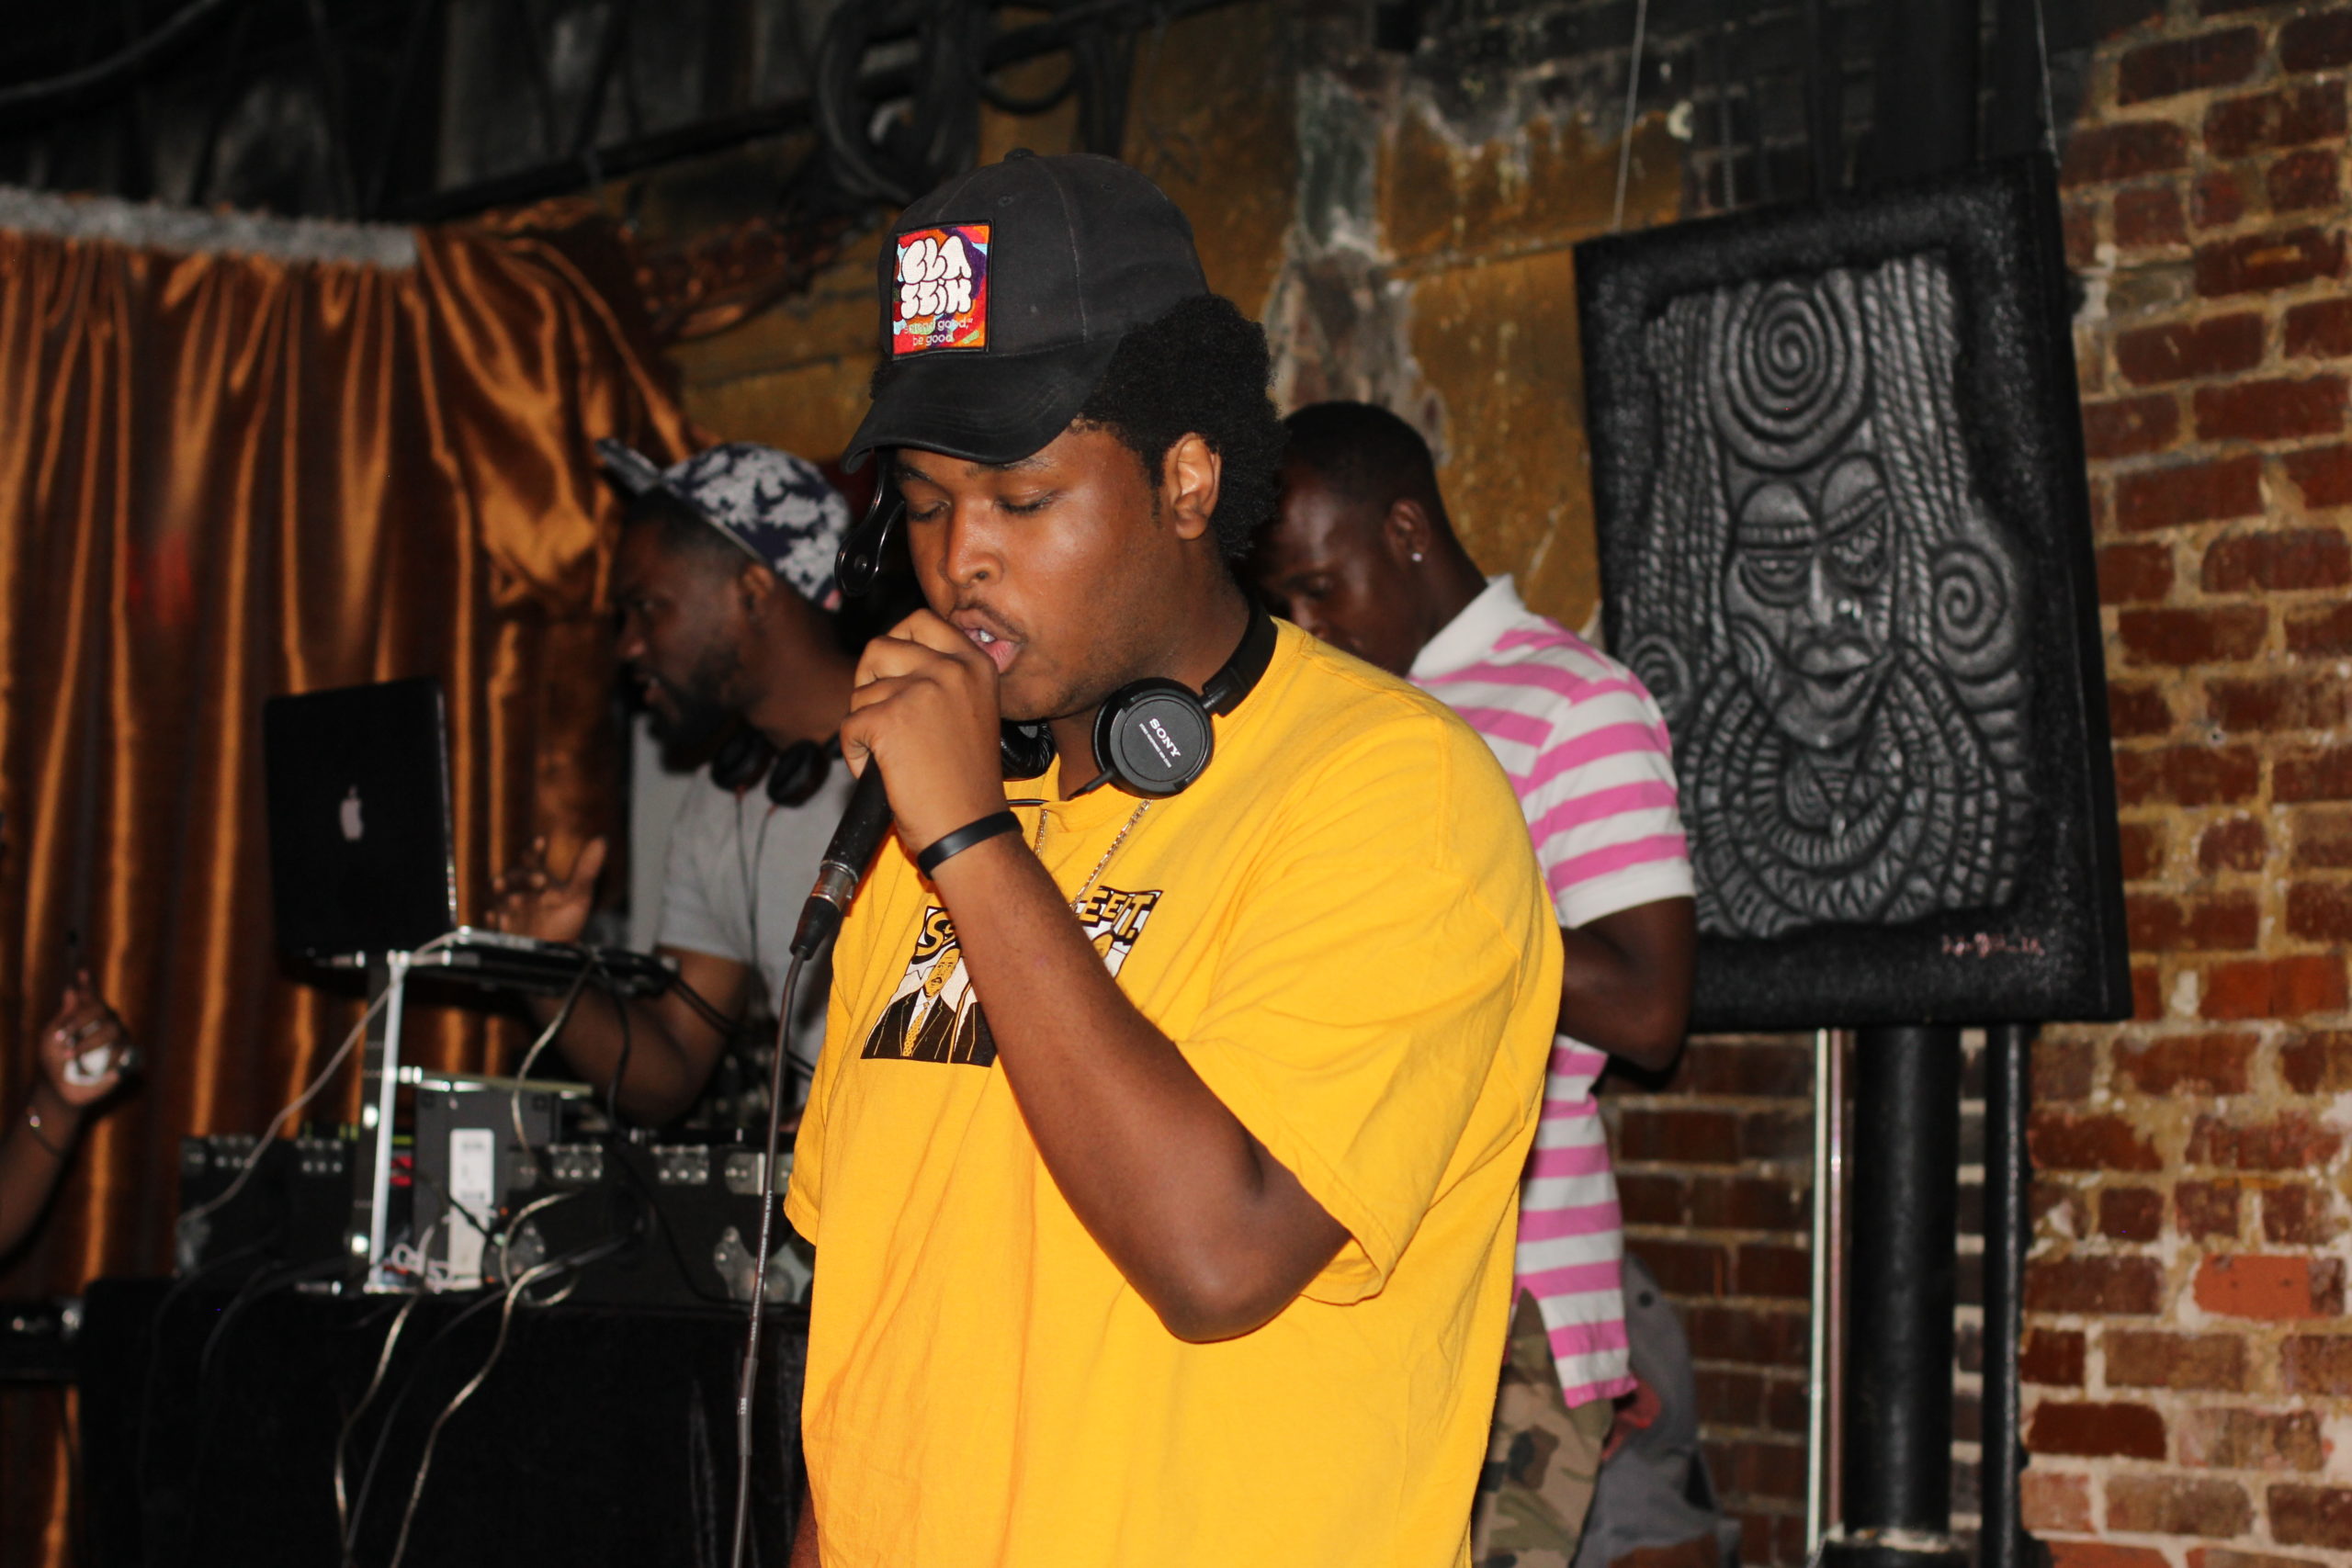 Plewto Smith Performs “Clayco” At UGRailroad Hip-Hop Show (Video)